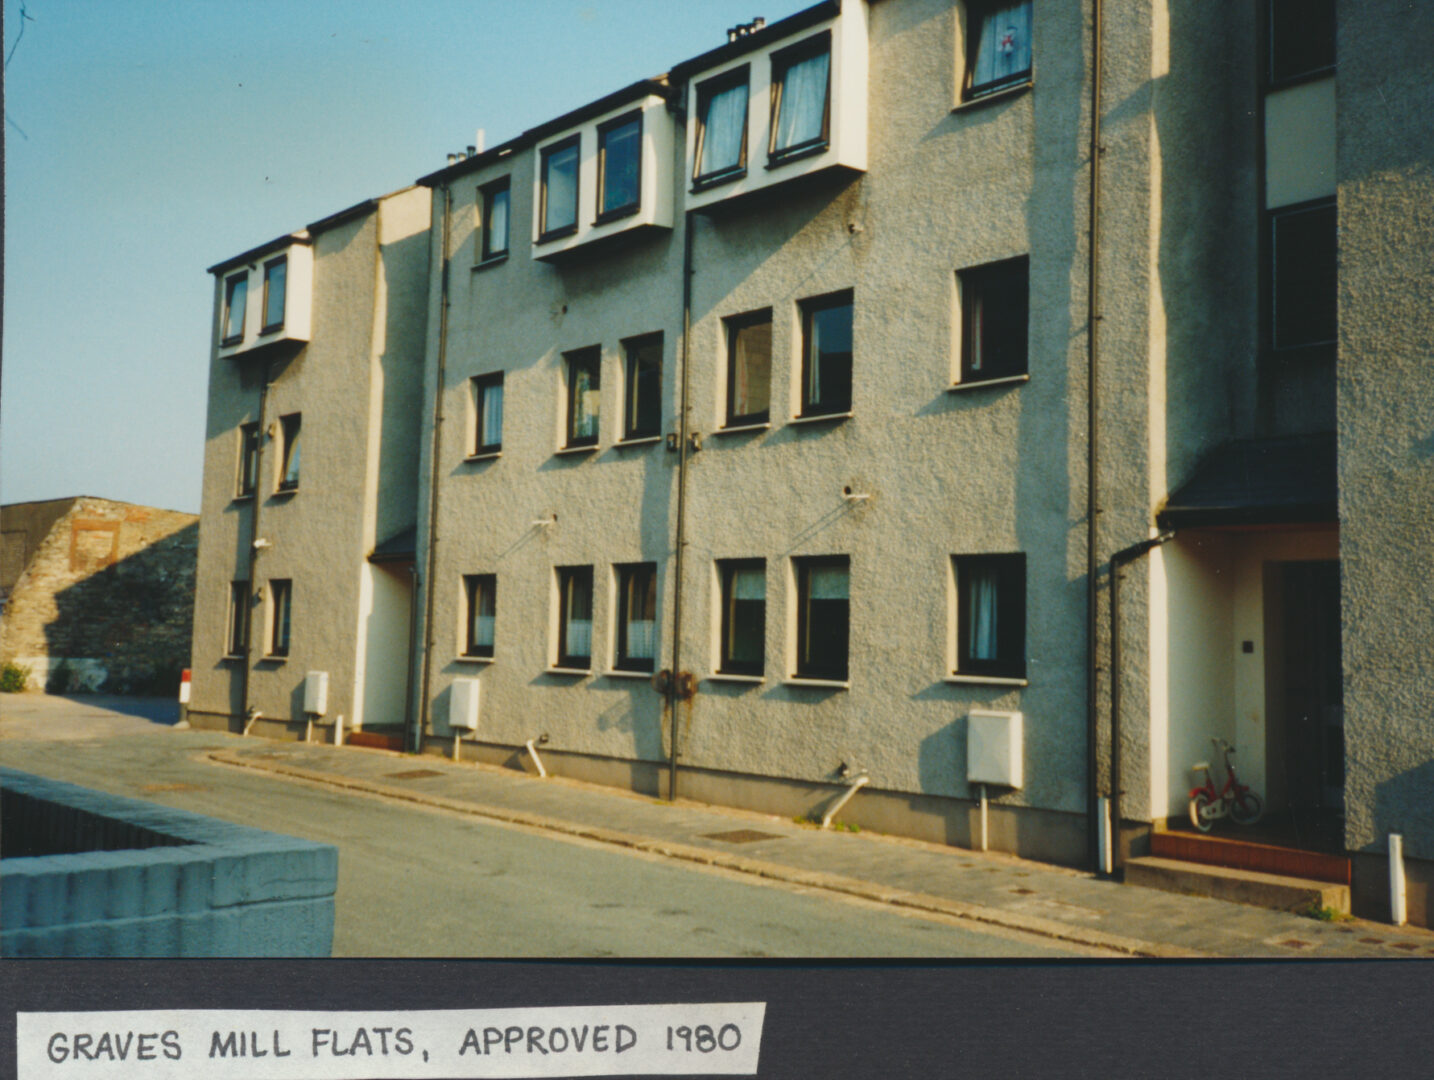 Graves Mill flats approved 1980 photo